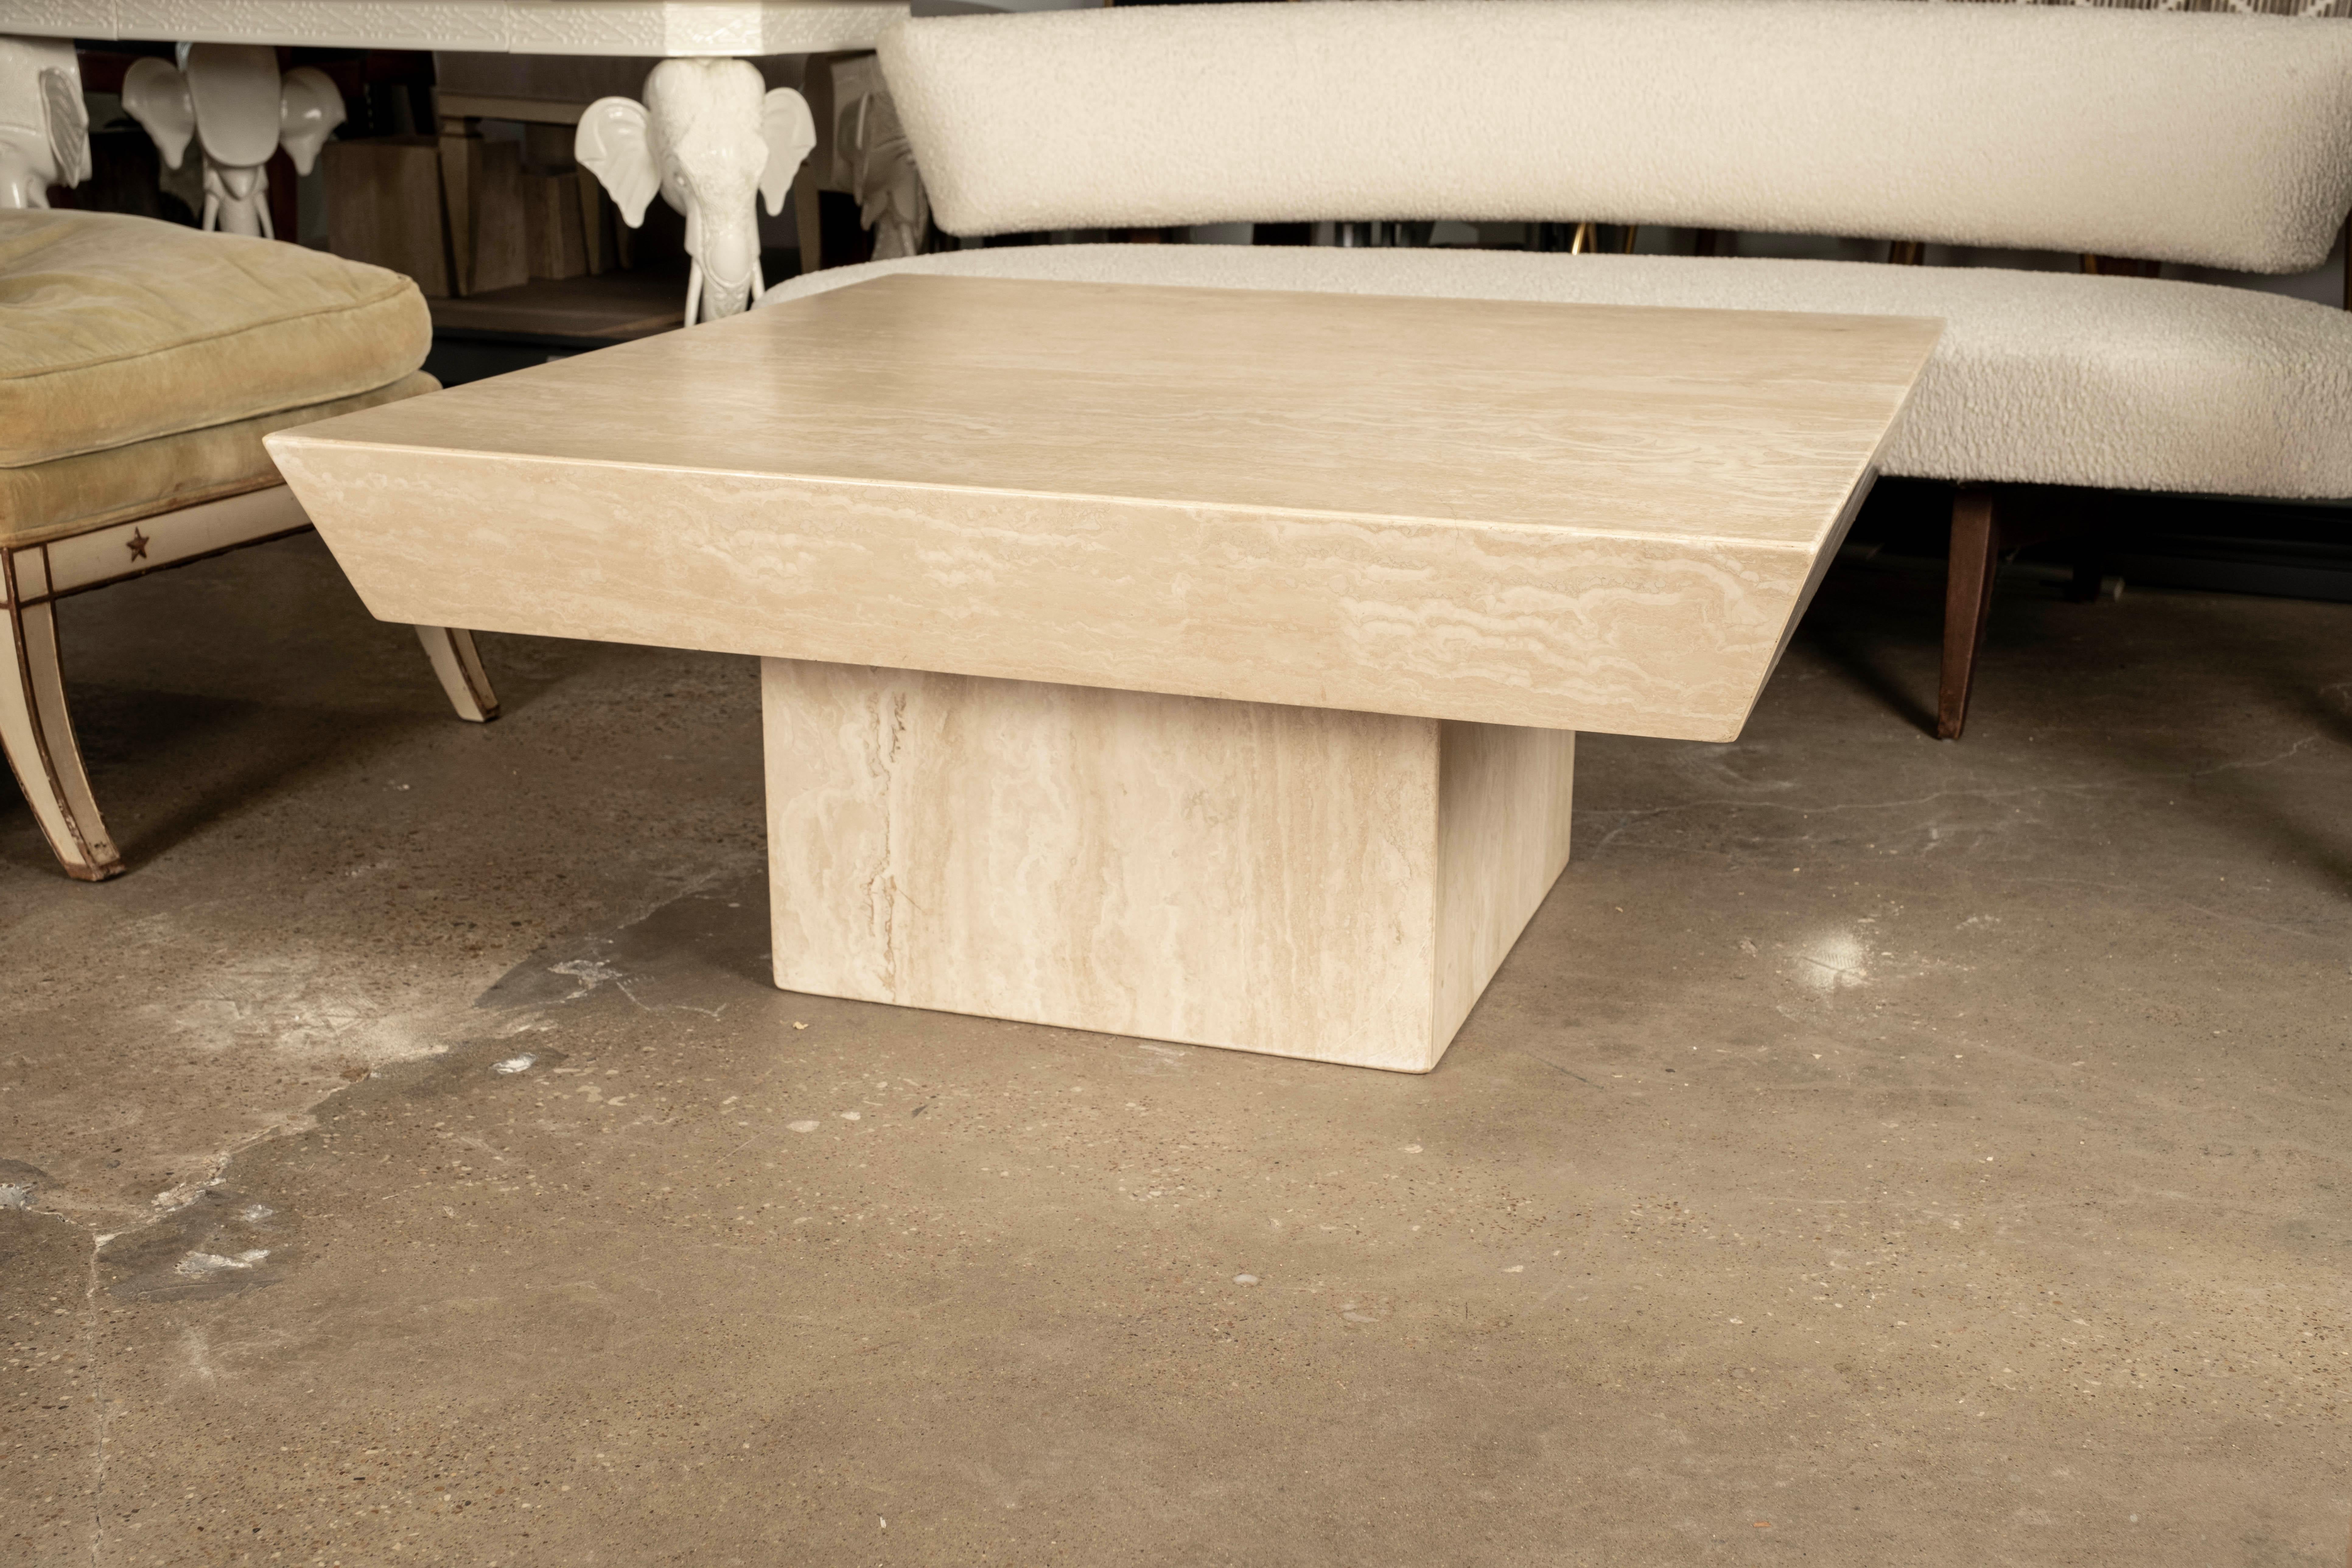 Italian Modern Travertine Coffee Table Attributed To Angelo Mangiarotti.
This shapely designed Italian Postmodern square honed travertine cocktail table appears to be floating.
It comes in two pieces: the base and the interestingly cut